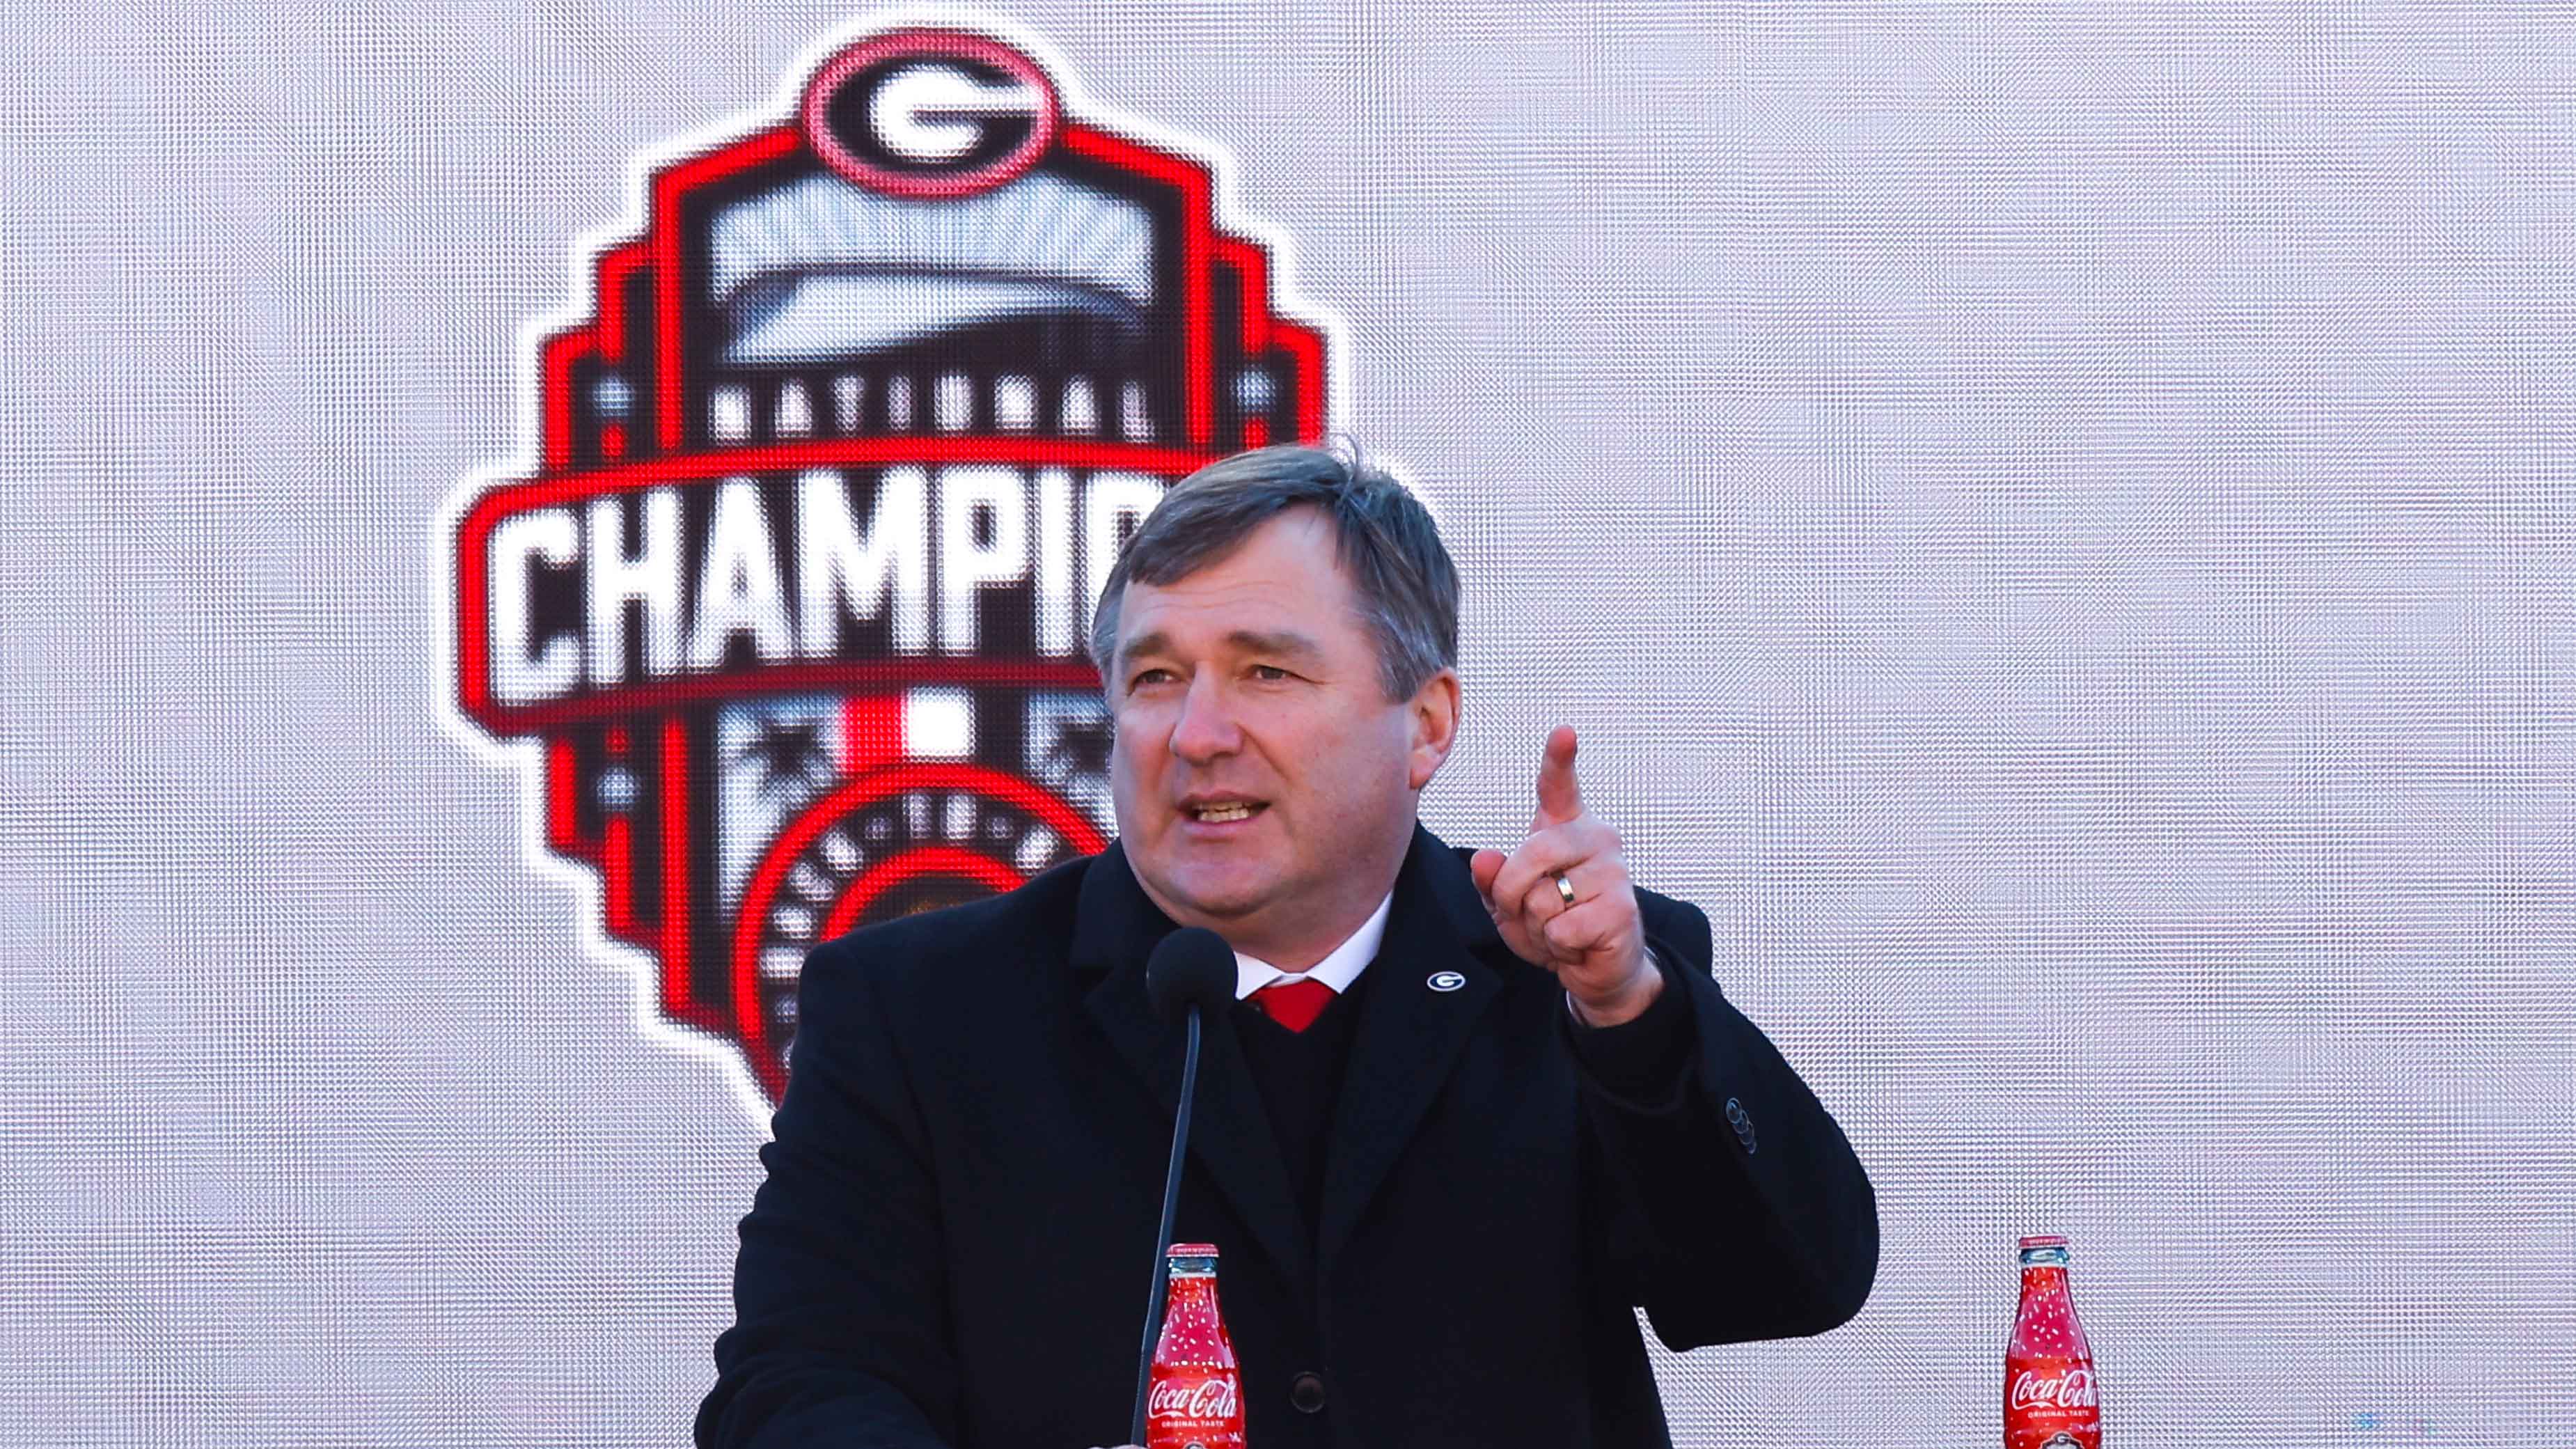 UGA Bulldogs decline invite to White House due to scheduling conflict